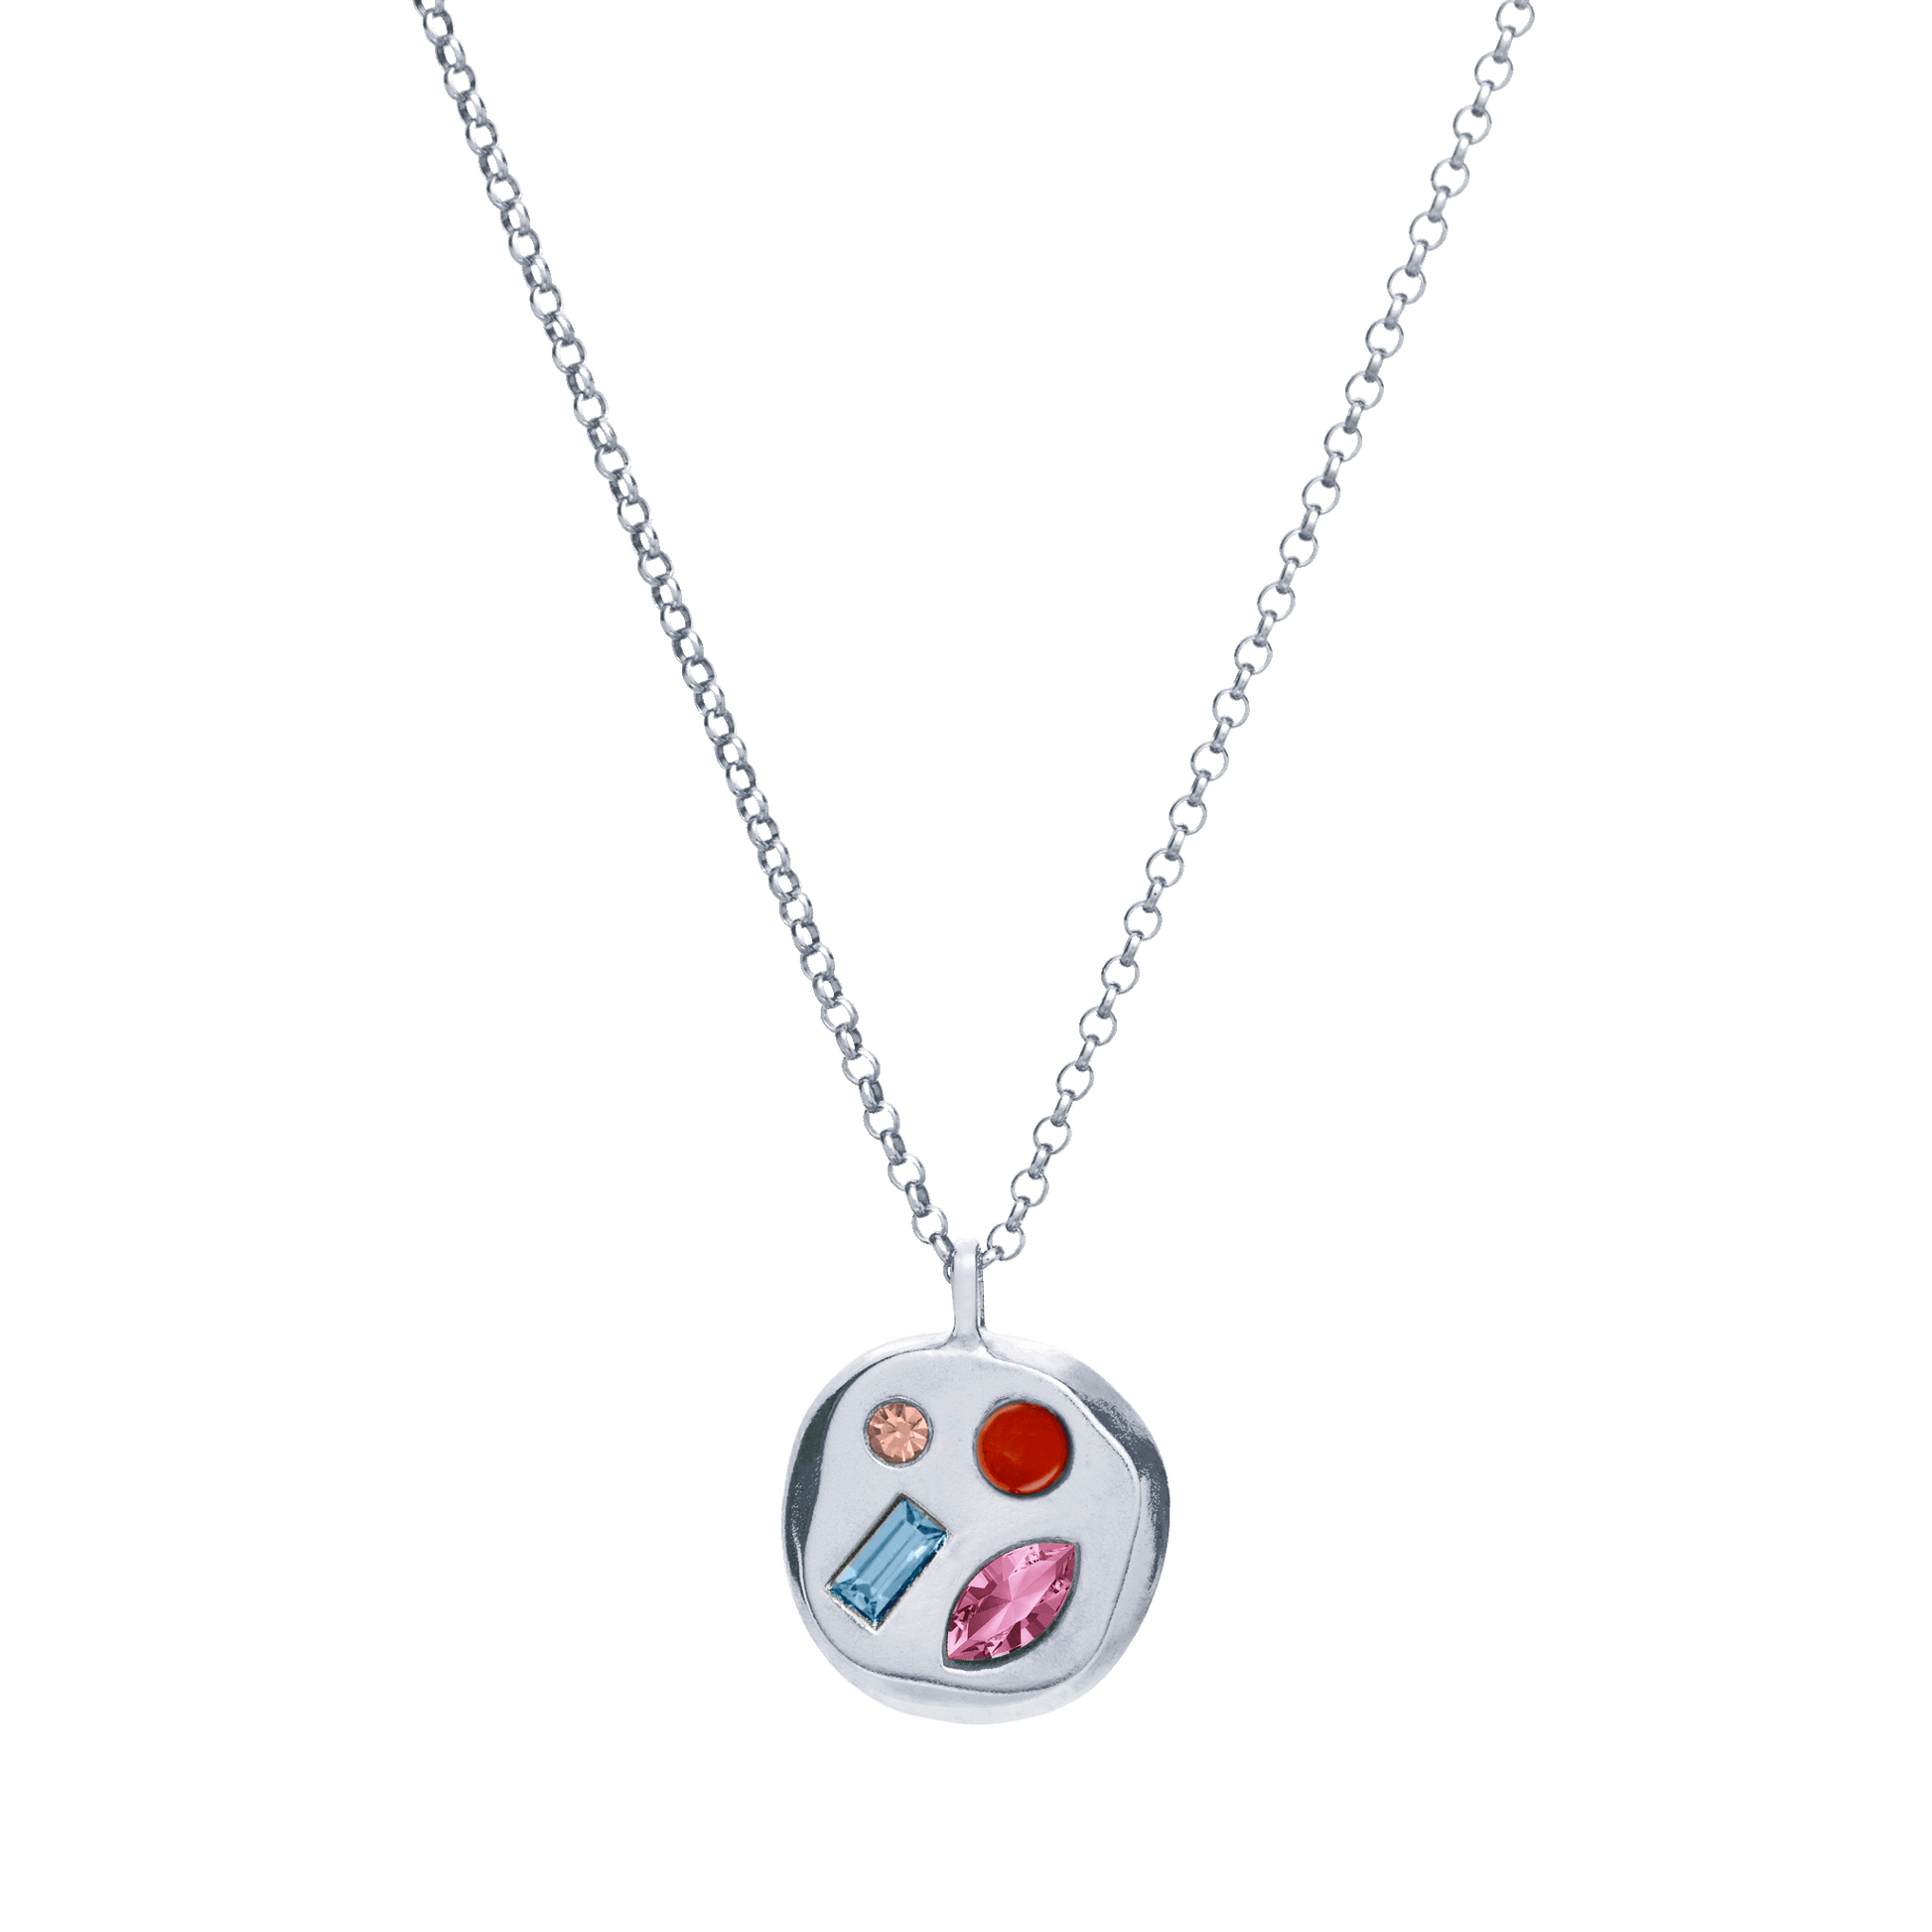 The October Seventeenth Pendant in Sterling Silver